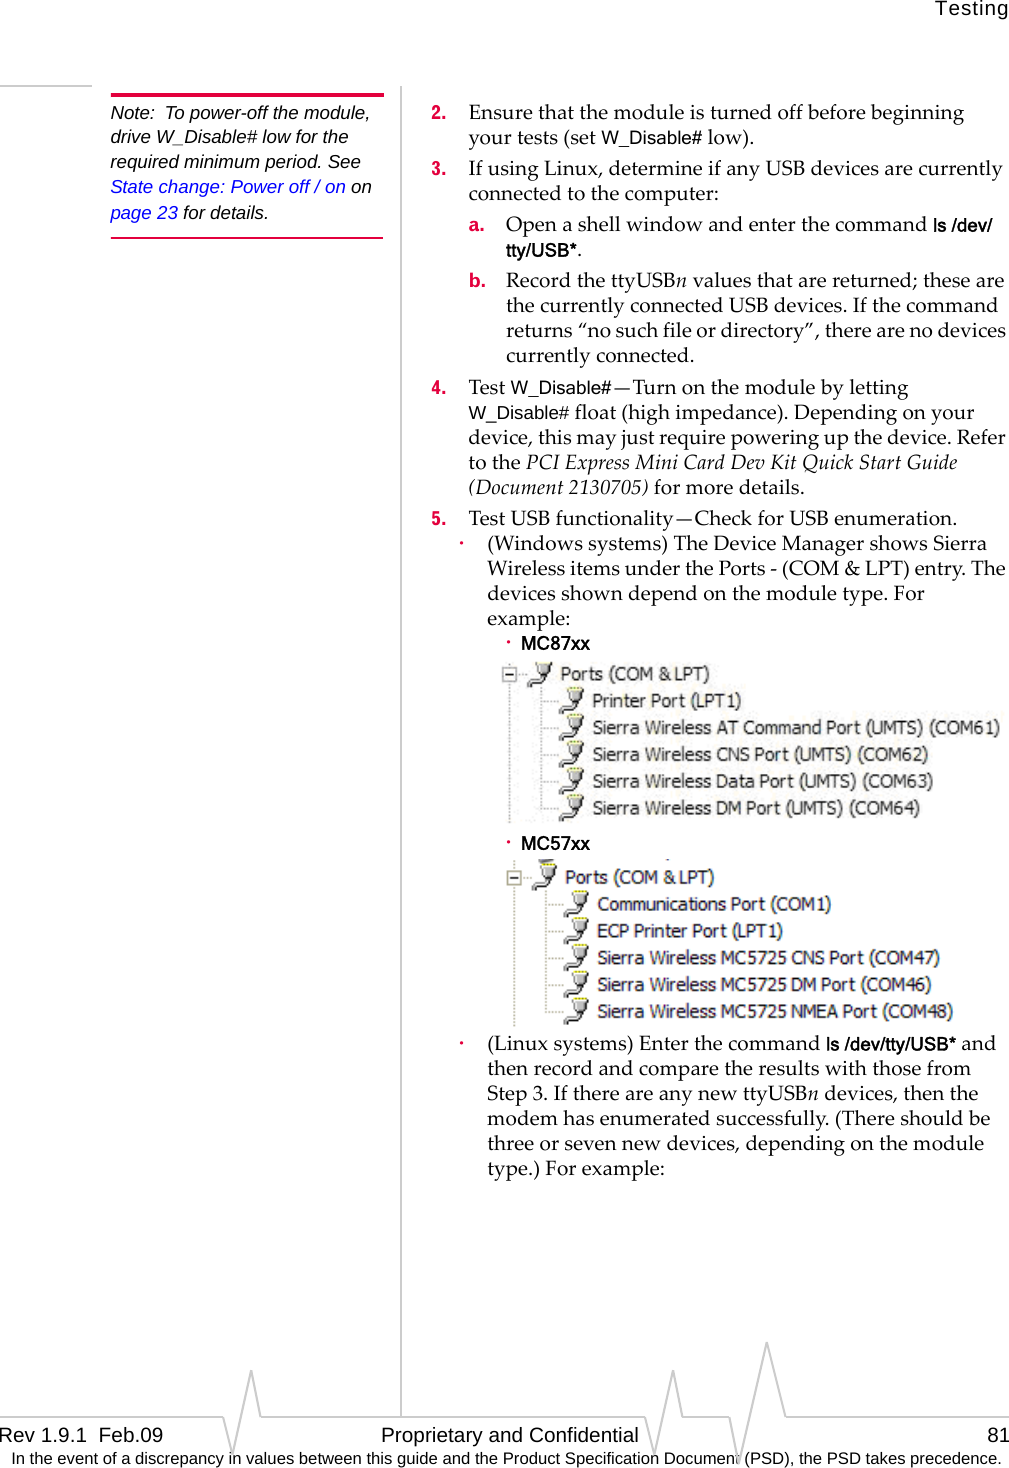 TestingRev 1.9.1  Feb.09   Proprietary and Confidential 81 In the event of a discrepancy in values between this guide and the Product Specification Document (PSD), the PSD takes precedence.Note: To power-off the module, drive W_Disable# low for the required minimum period. See State change: Power off / on on page 23 for details.2. Ensurethatthemoduleisturnedoffbeforebeginningyourtests(setW_Disable#low).3. IfusingLinux,determineifanyUSBdevicesarecurrentlyconnectedtothecomputer:a. Openashellwindowandenterthecommandls /dev/tty/USB*.b. RecordthettyUSBnvaluesthatarereturned;thesearethecurrentlyconnectedUSBdevices.Ifthecommandreturns“nosuchfileordirectory”,therearenodevicescurrentlyconnected.4. TestW_Disable#—TurnonthemodulebylettingW_Disable#float(highimpedance).Dependingonyourdevice,thismayjustrequirepoweringupthedevice.RefertothePCIExpressMiniCardDevKitQuickStartGuide(Document2130705)formoredetails.5. TestUSBfunctionality—CheckforUSBenumeration.·(Windowssystems)TheDeviceManagershowsSierraWirelessitemsunderthePorts‐(COM&amp;LPT)entry.Thedevicesshowndependonthemoduletype.Forexample:·MC87xx·MC57xx·(Linuxsystems)Enterthecommandls /dev/tty/USB*andthenrecordandcomparetheresultswiththosefromStep3.IfthereareanynewttyUSBndevices,thenthemodemhasenumeratedsuccessfully.(Thereshouldbethreeorsevennewdevices,dependingonthemoduletype.)Forexample: